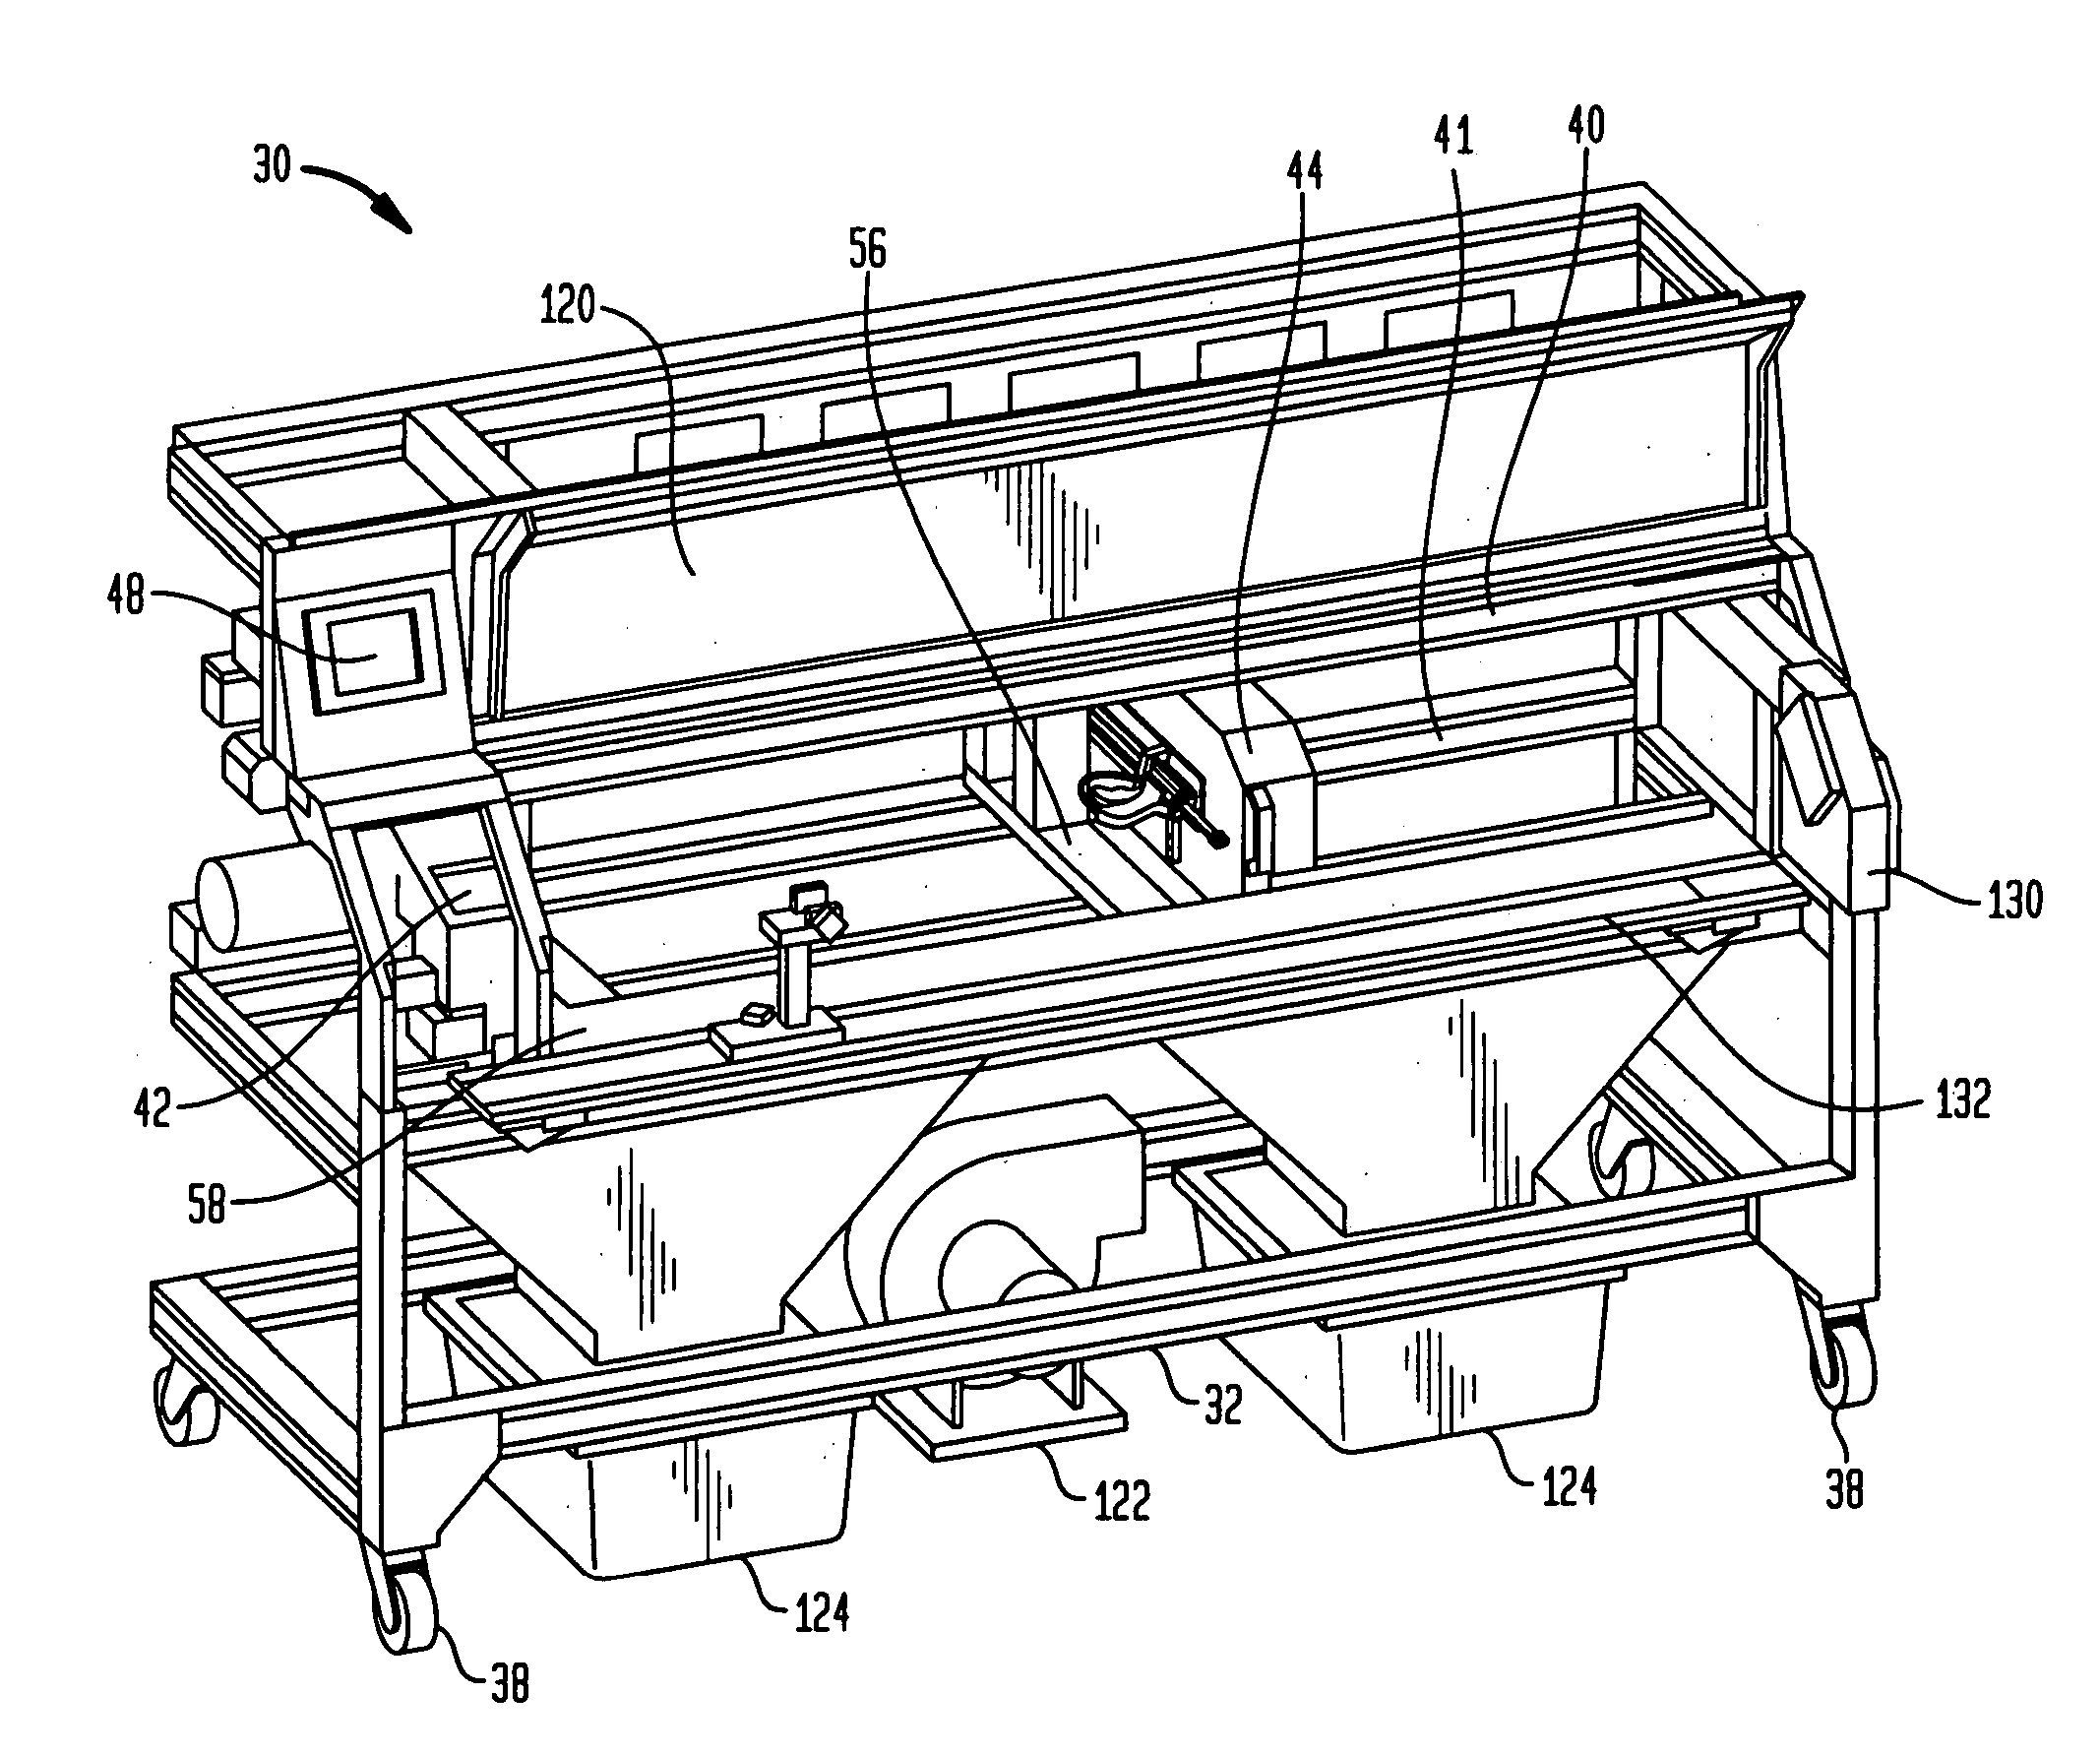 Window covering cutting apparatus and methods